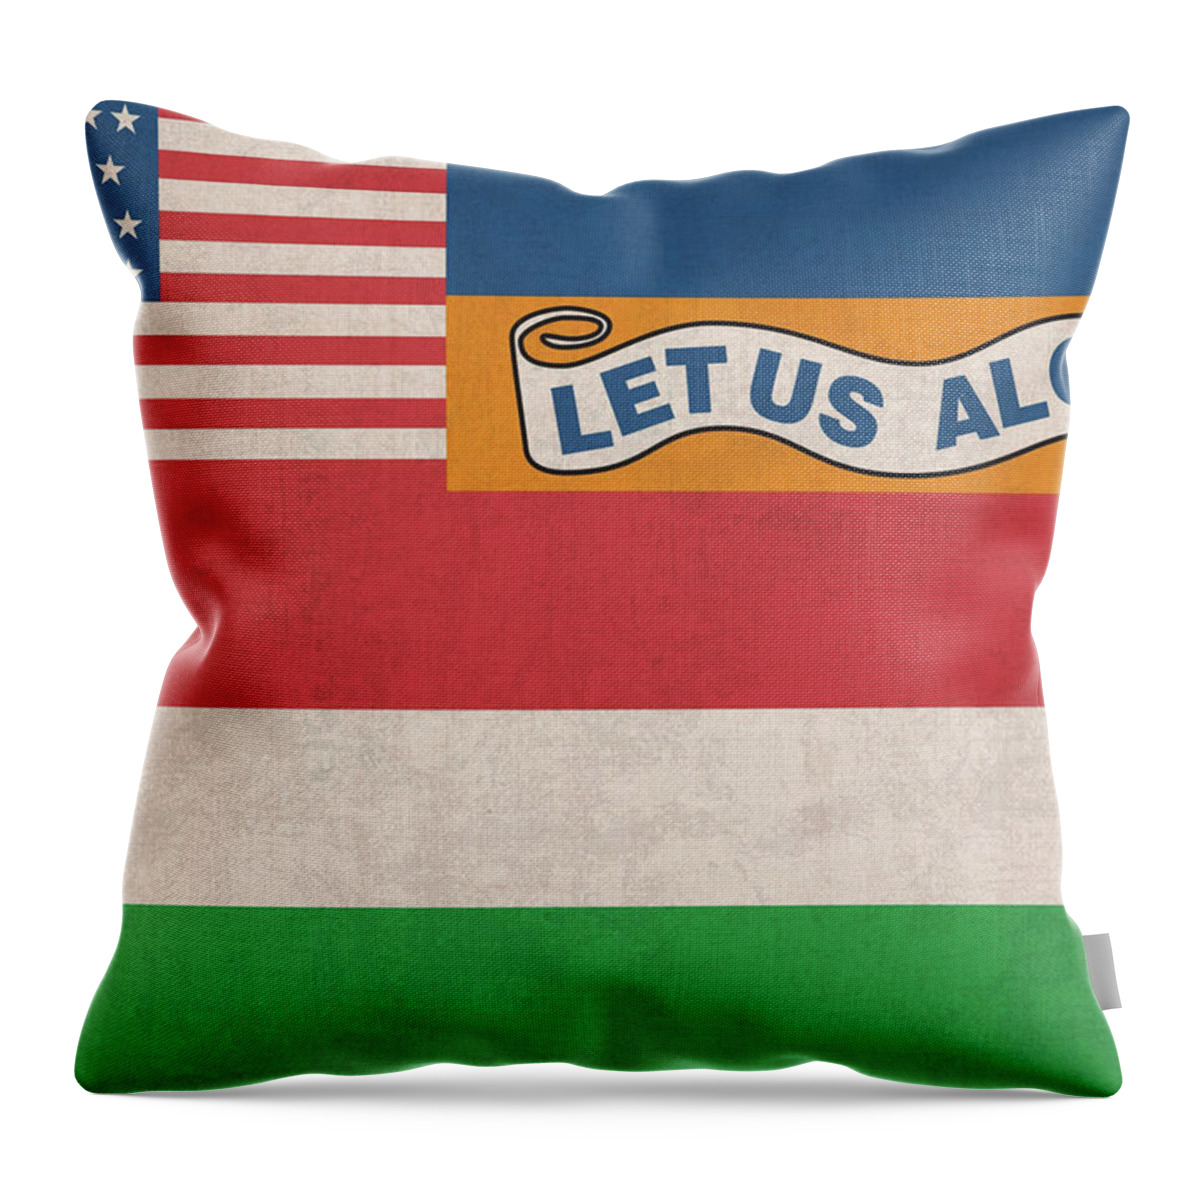 Let Us Alone Throw Pillow featuring the mixed media Let Us Alone Vintage State of Florida Flag by Design Turnpike